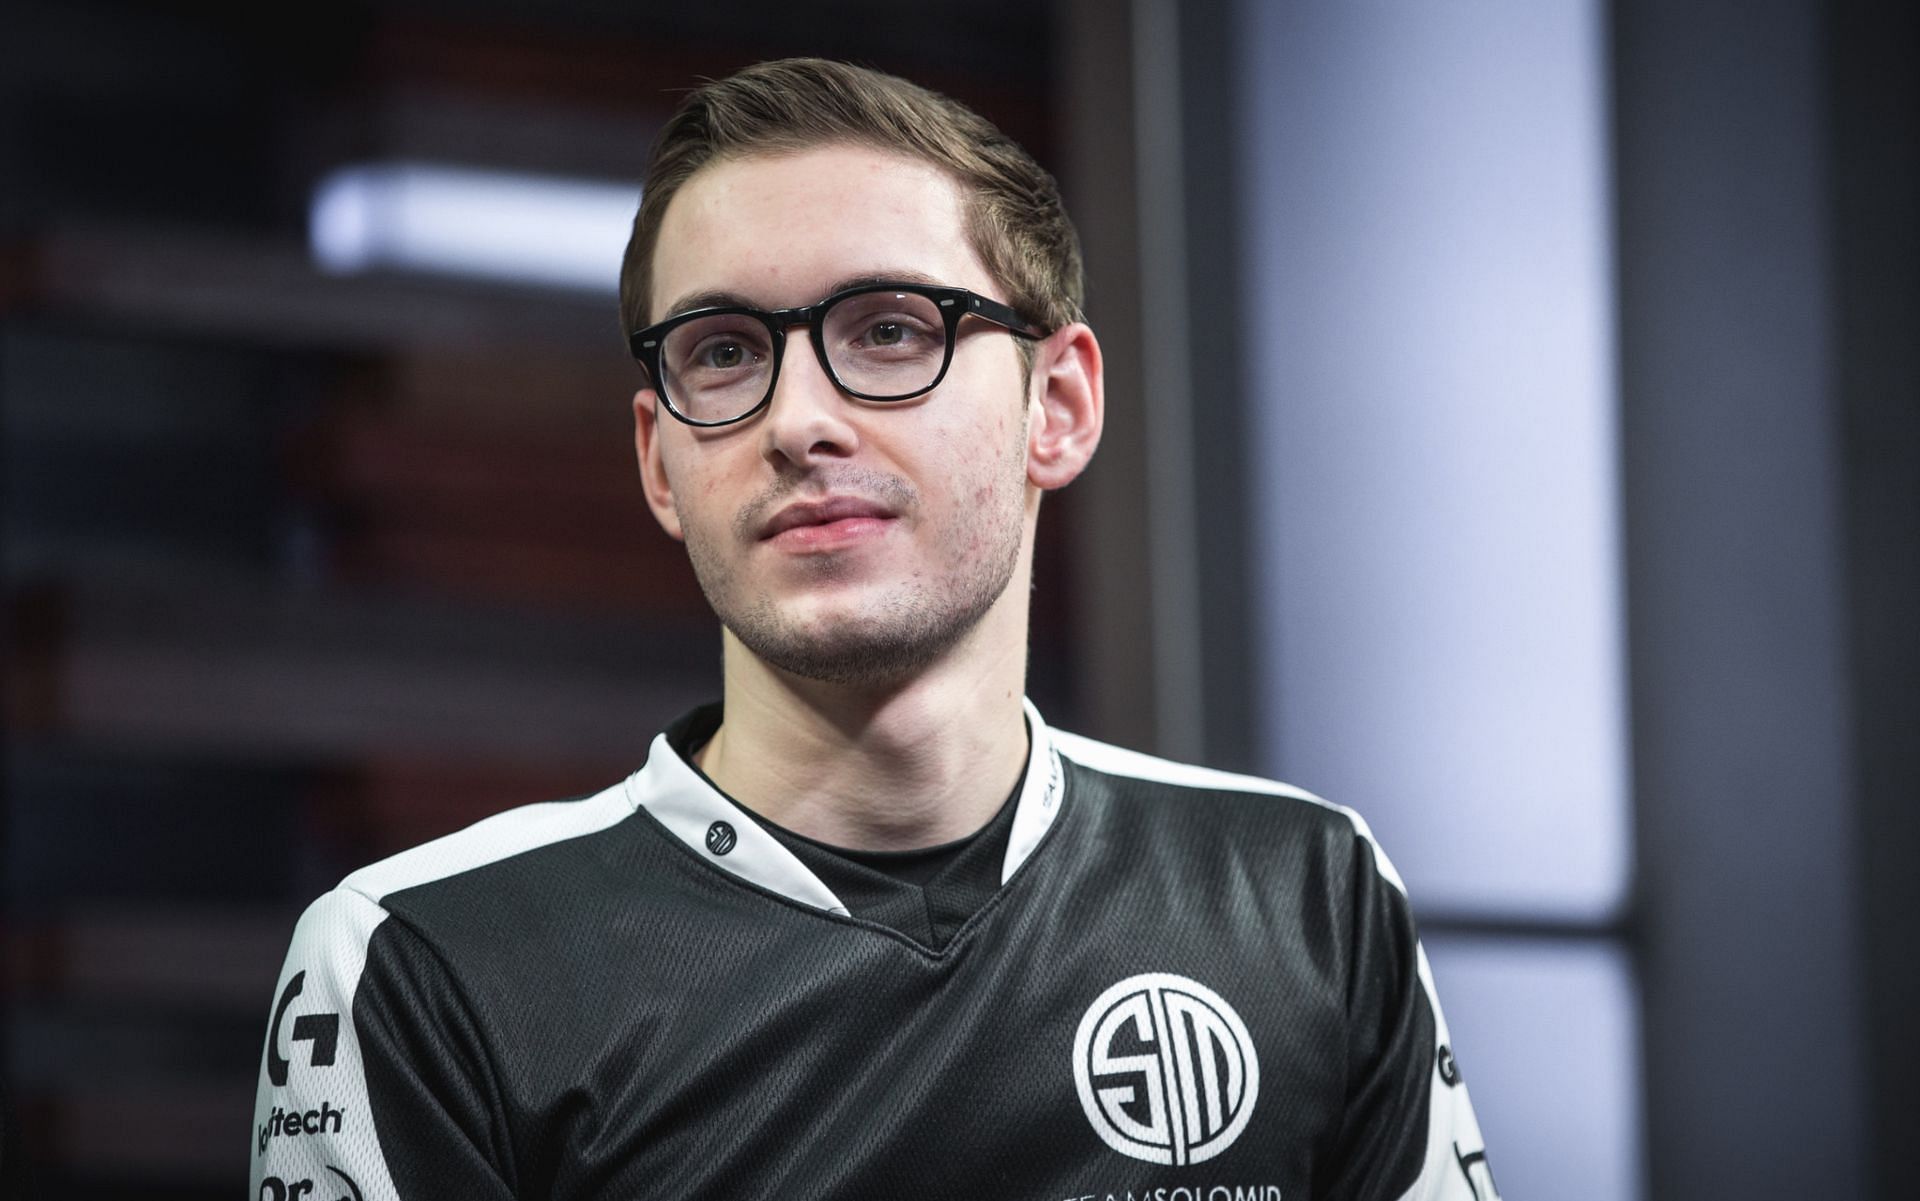 Bjergsen will reportedly follow Doublelift and join the 100 Thieves ahead of the 2023 LCS season (Image via Riot Games)